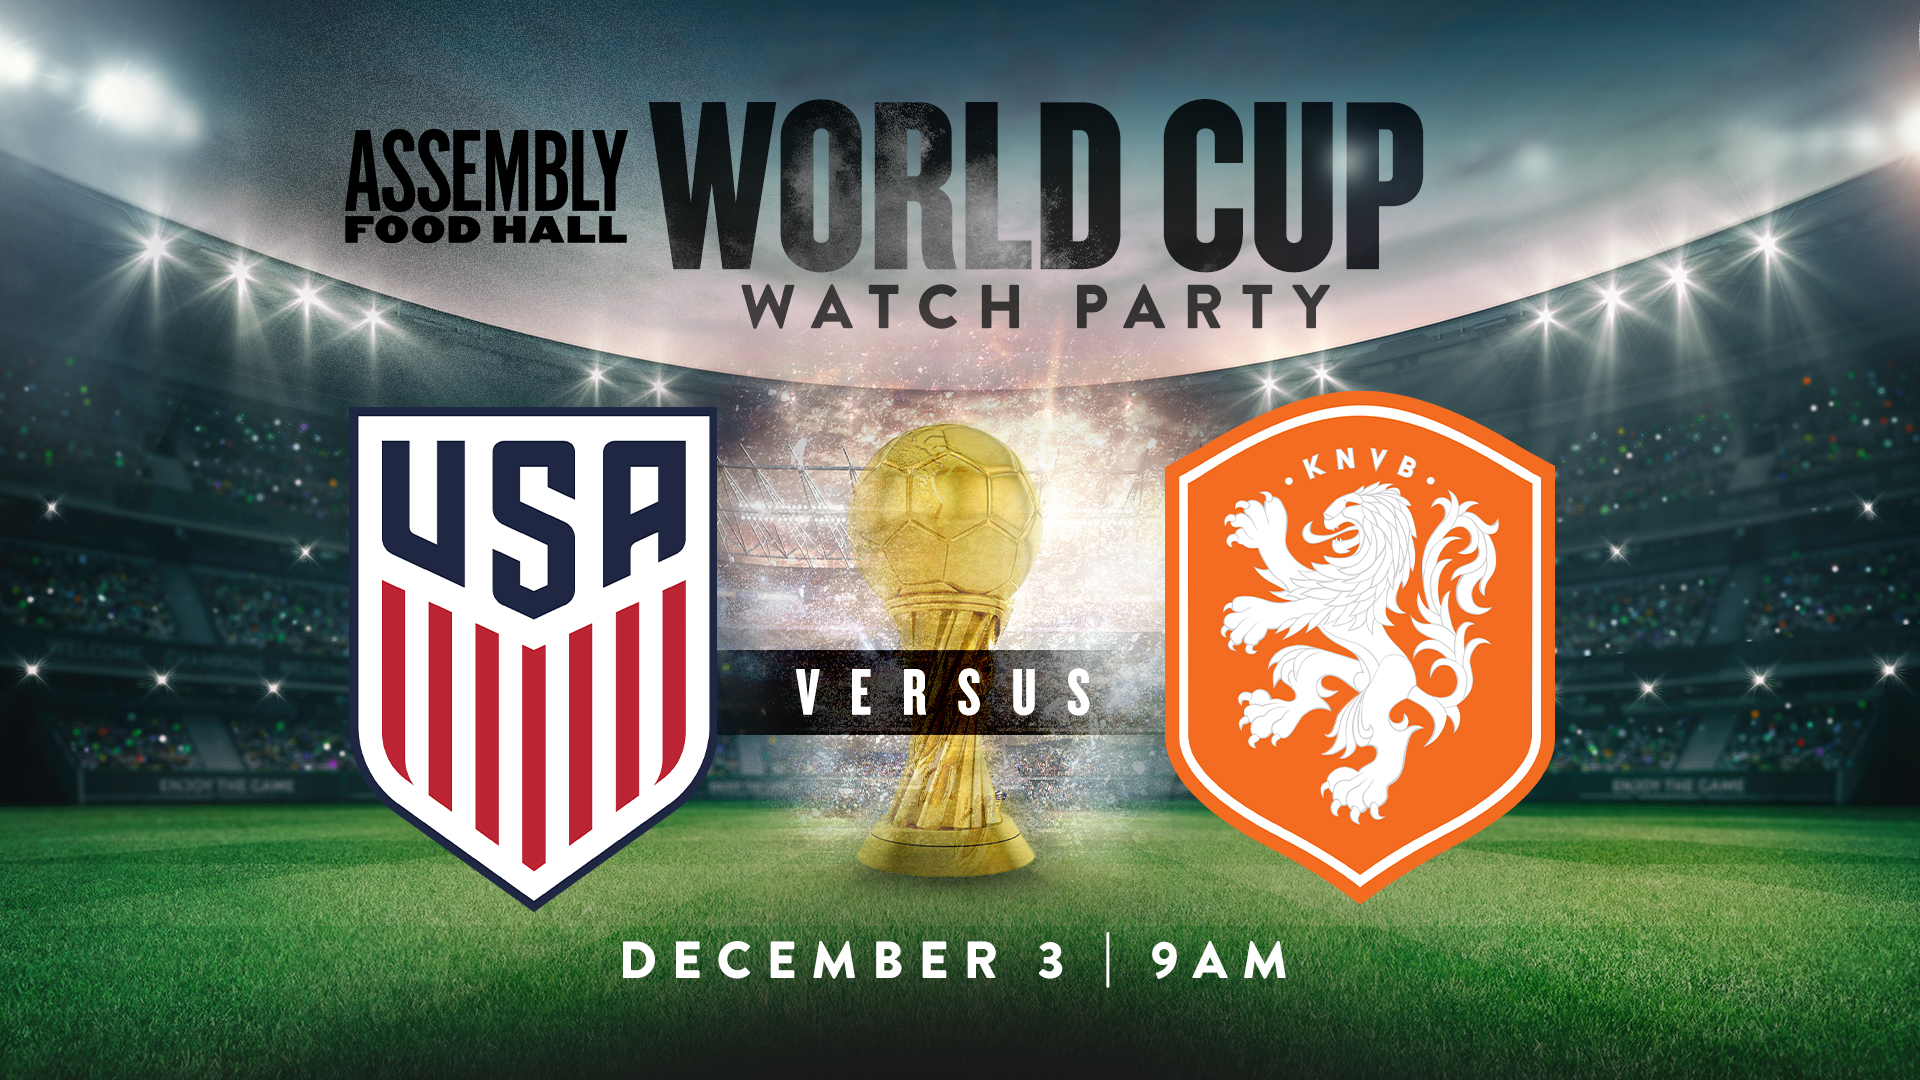 Promo image of World Cup Watch Party: USA VS. NETHERLANDS